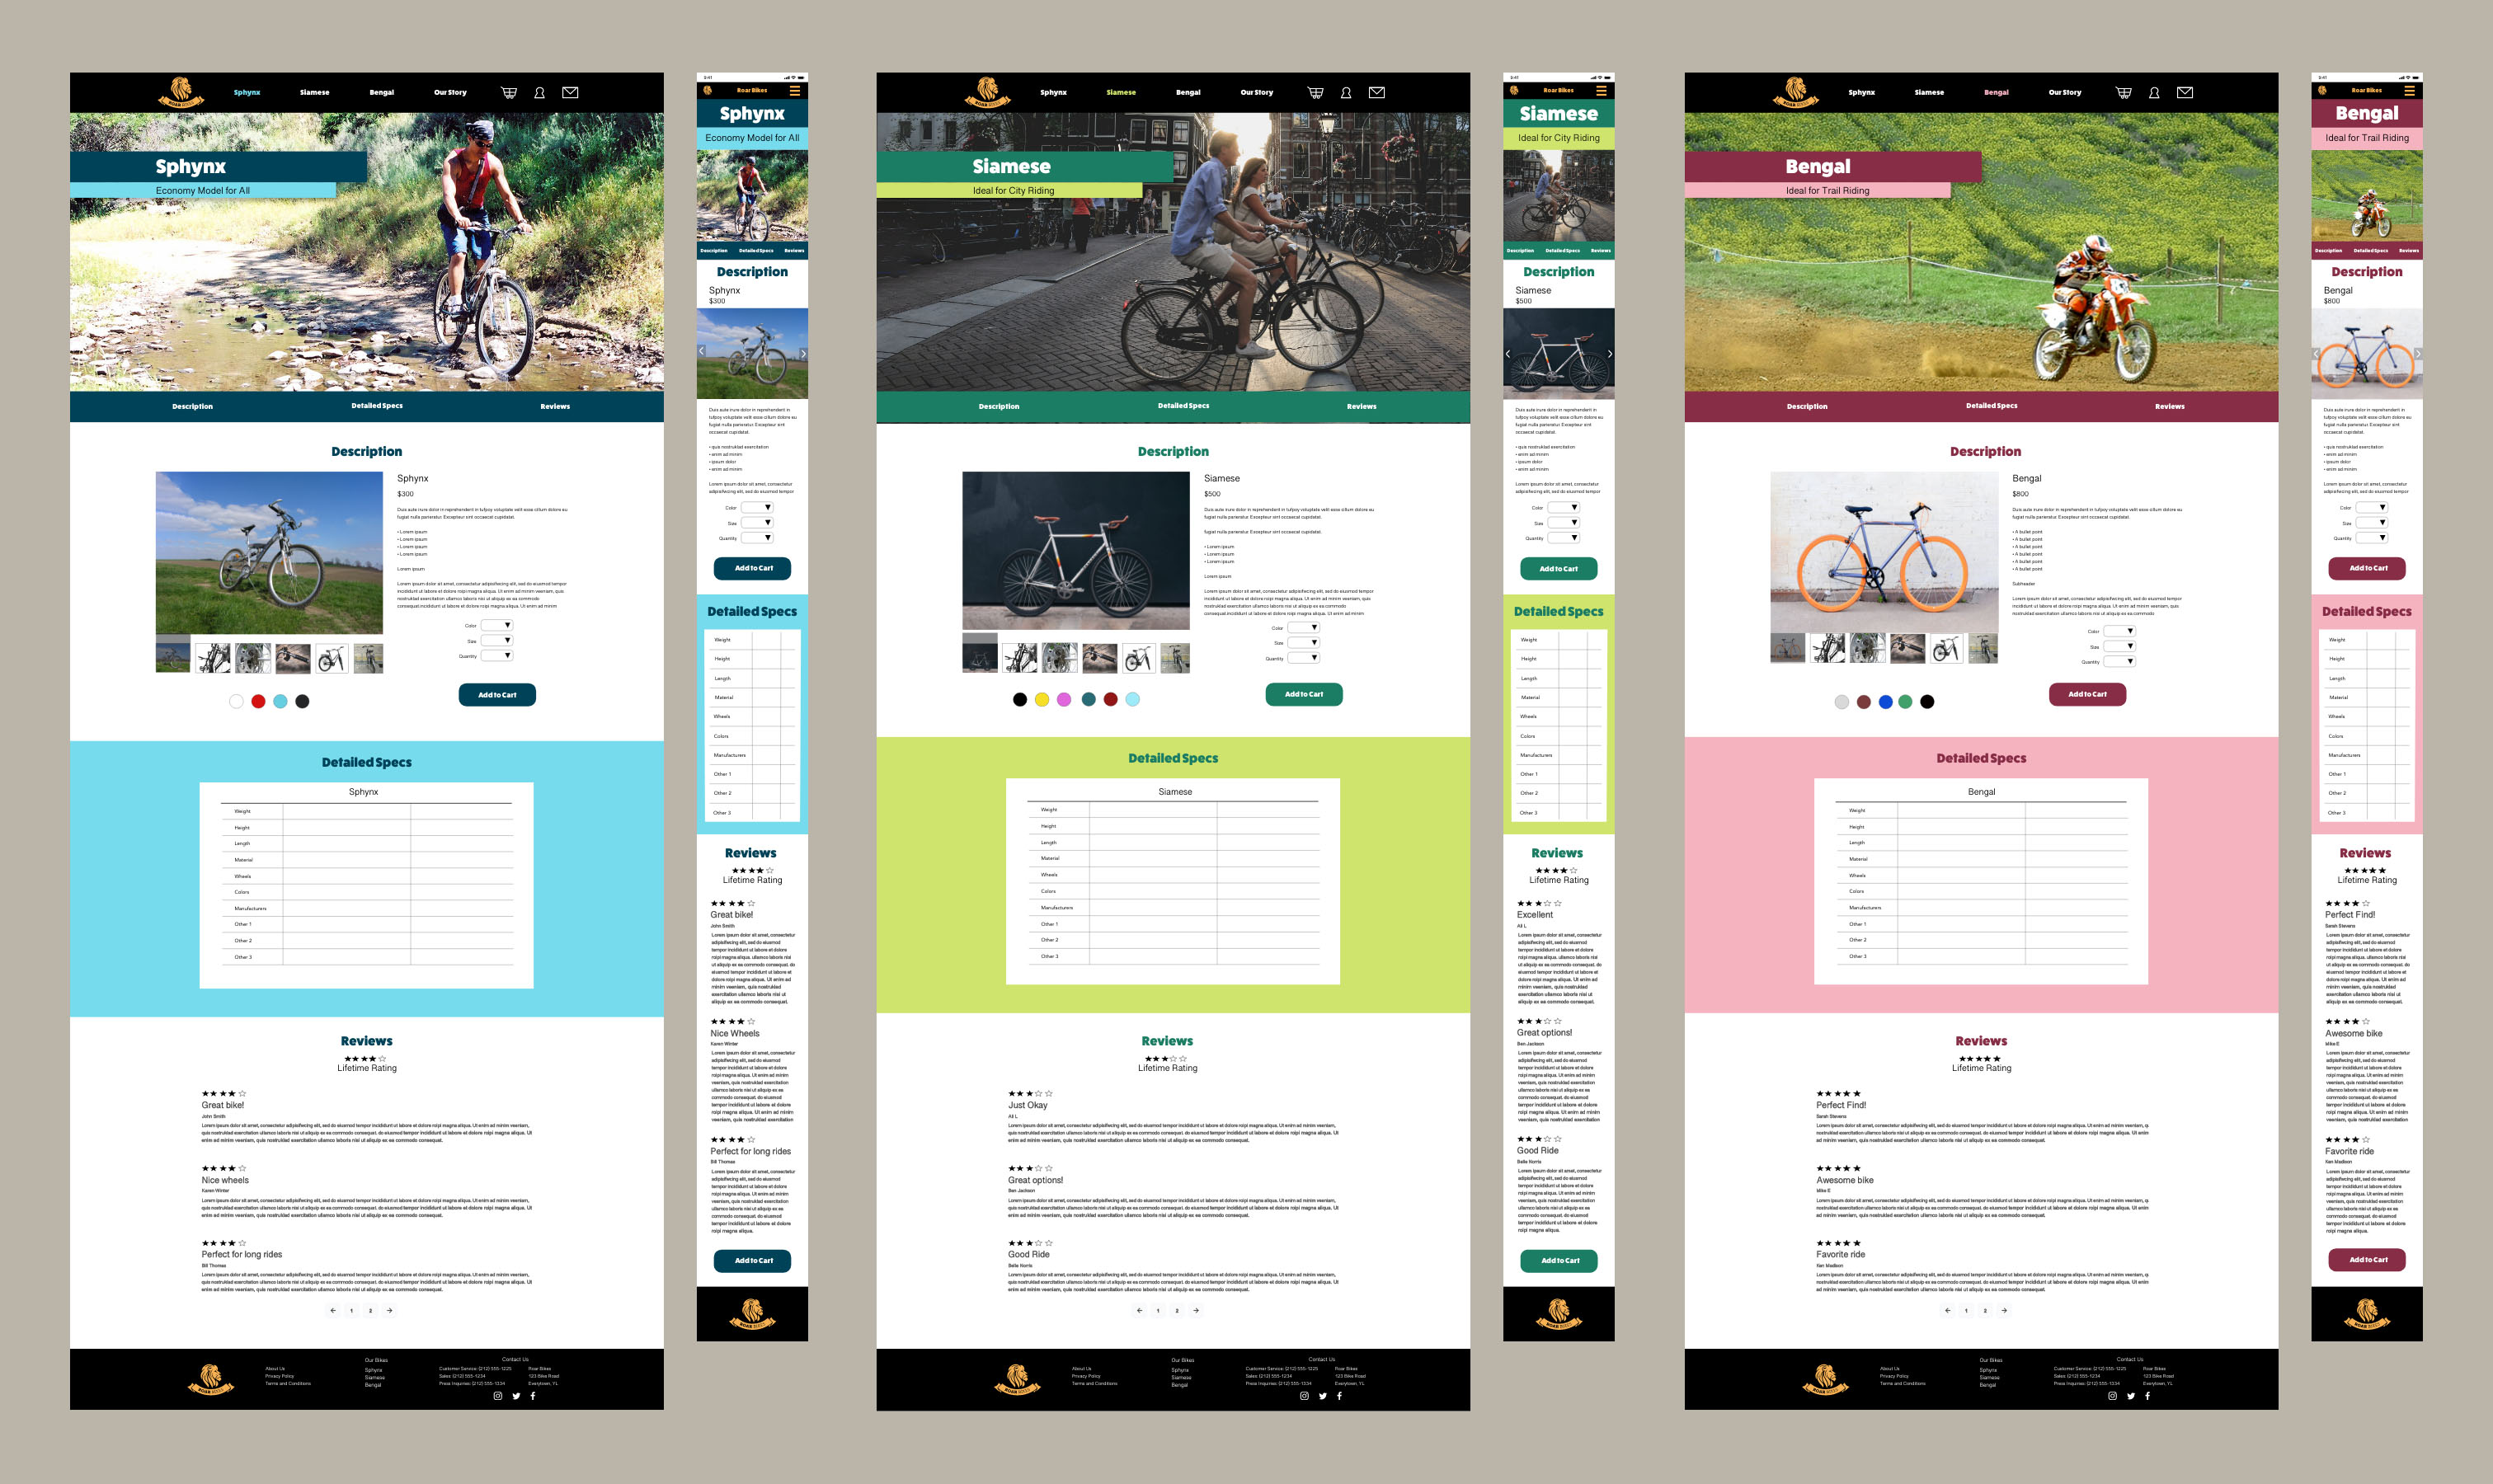 Mockups of three product pages from Roar Bikes website.